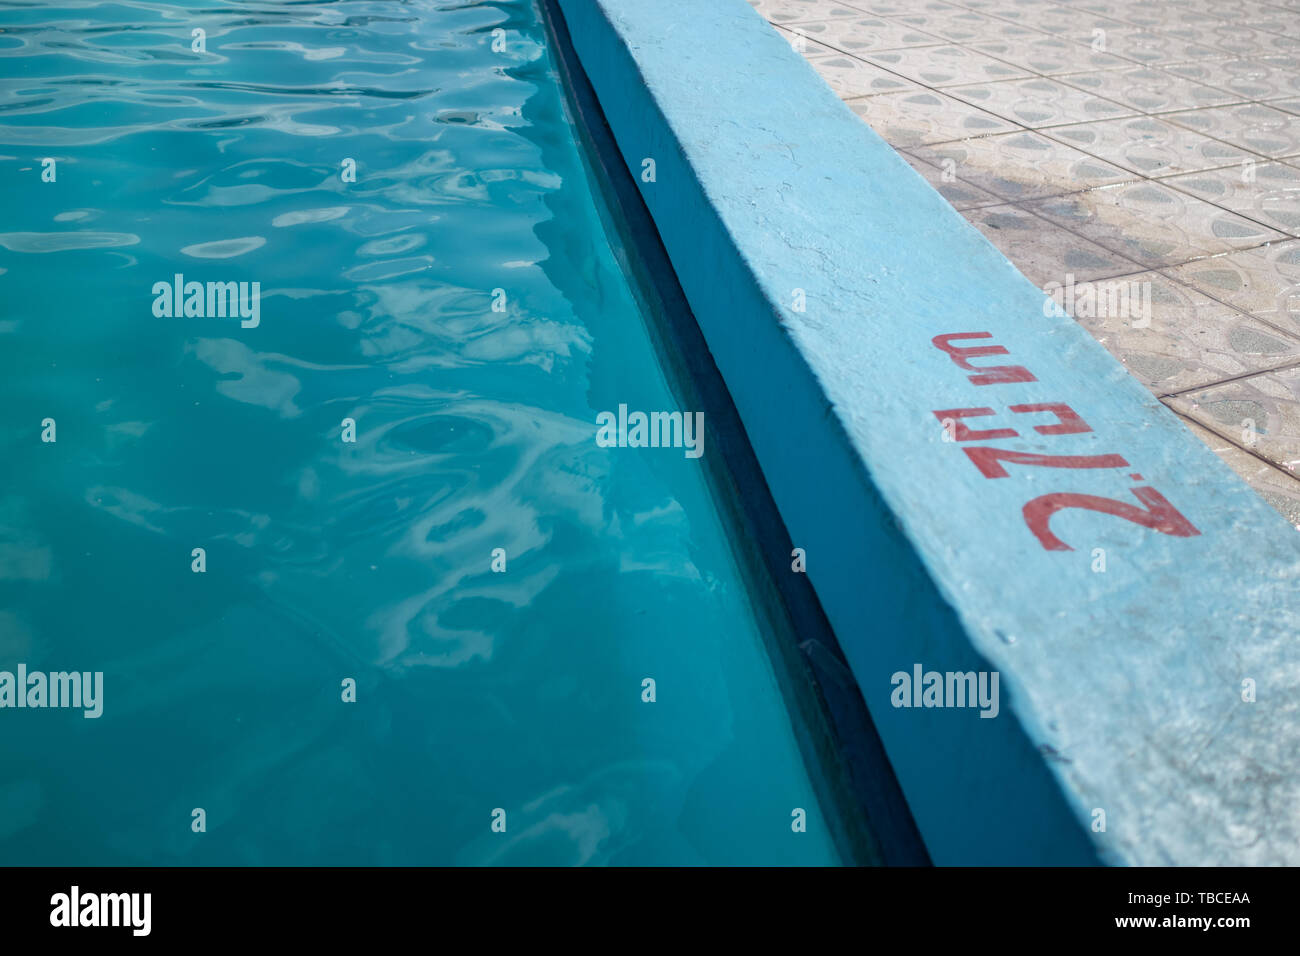 Inviting blue pool with 2.70m depth marking Stock Photo